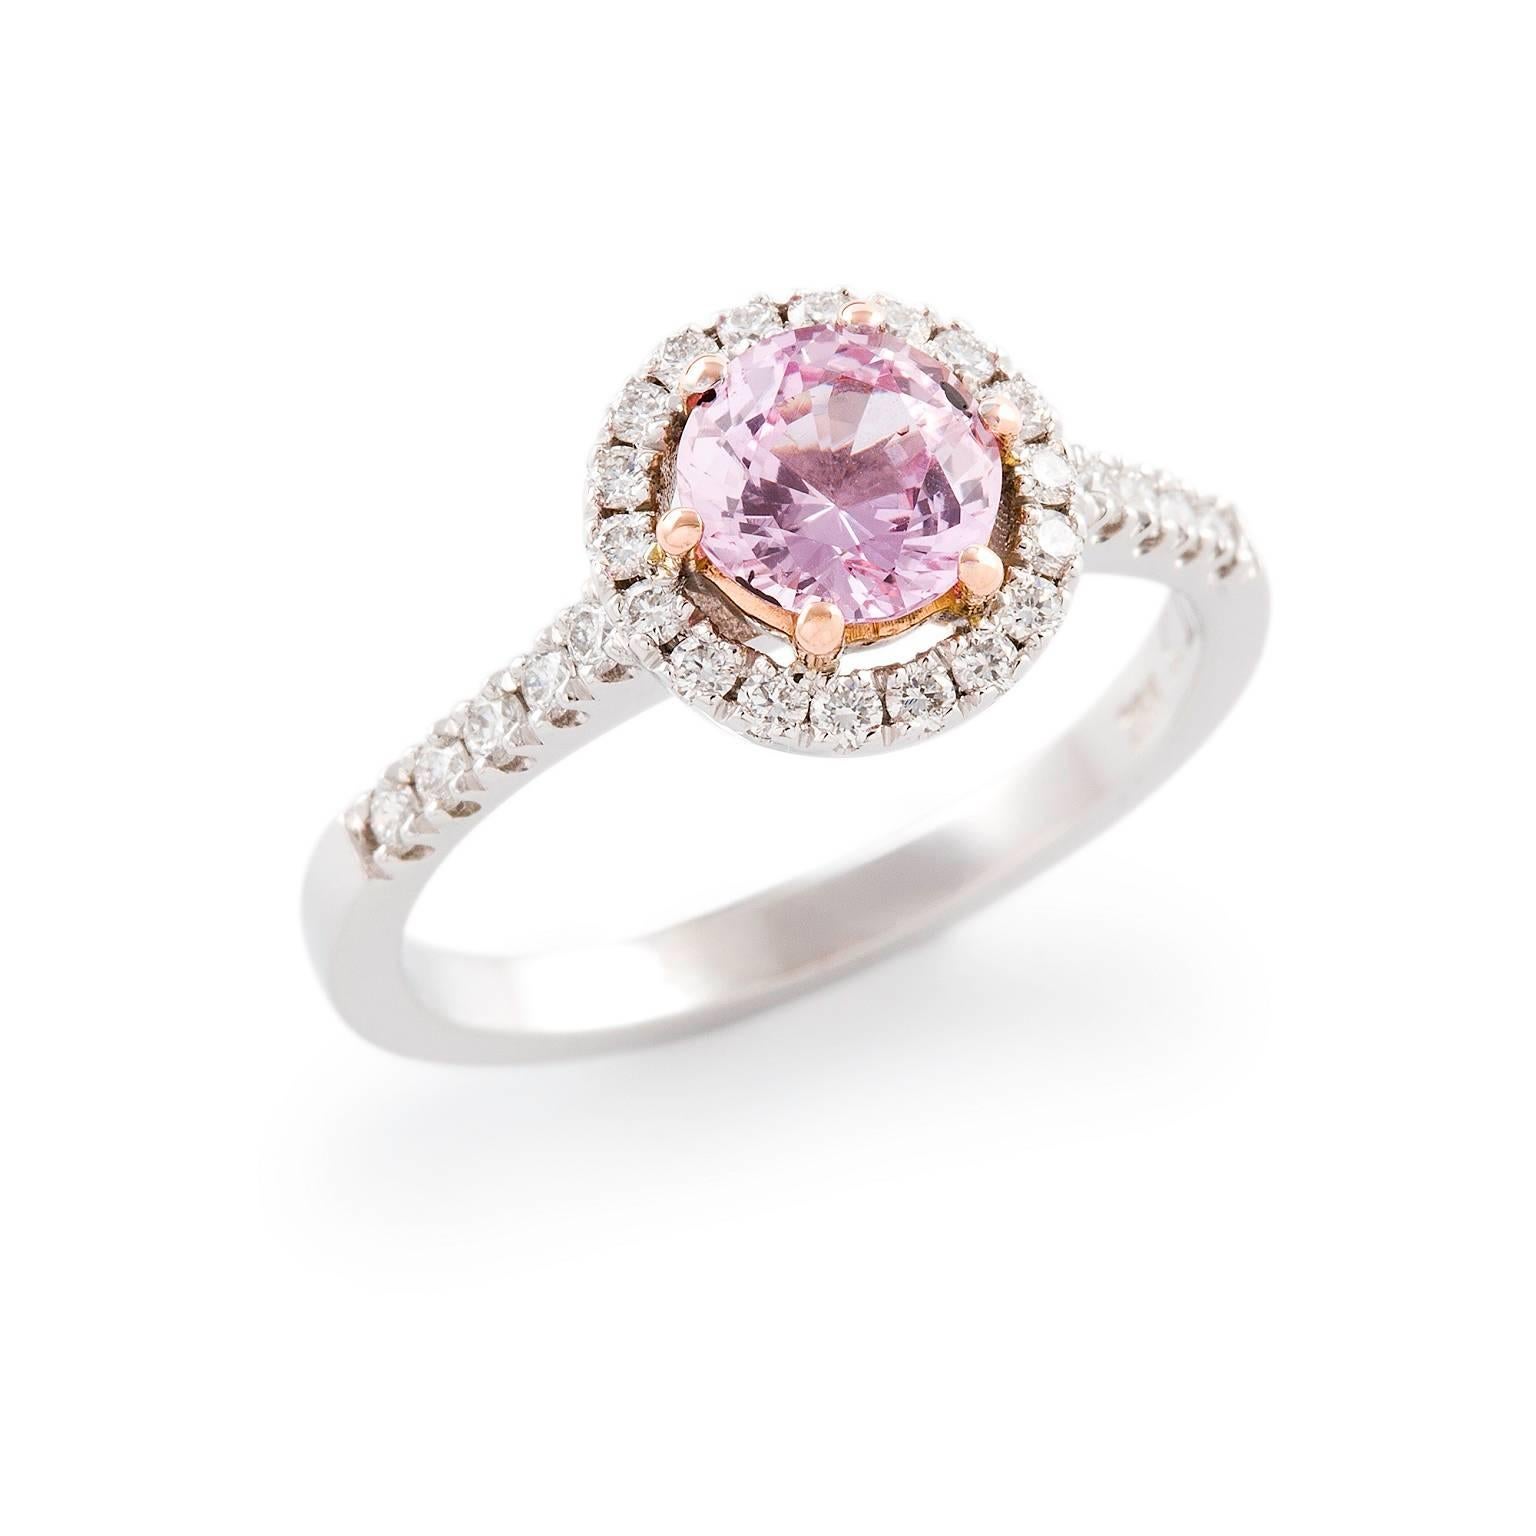 Rosa Zaffiro Ring

This sweet dress ring in 18ct white and rose gold is set with a delightful pastel pink sapphire which is surrounded by a halo of petite diamonds that also extend to the shoulders of the elegant band.

Round faceted sapphire: pale